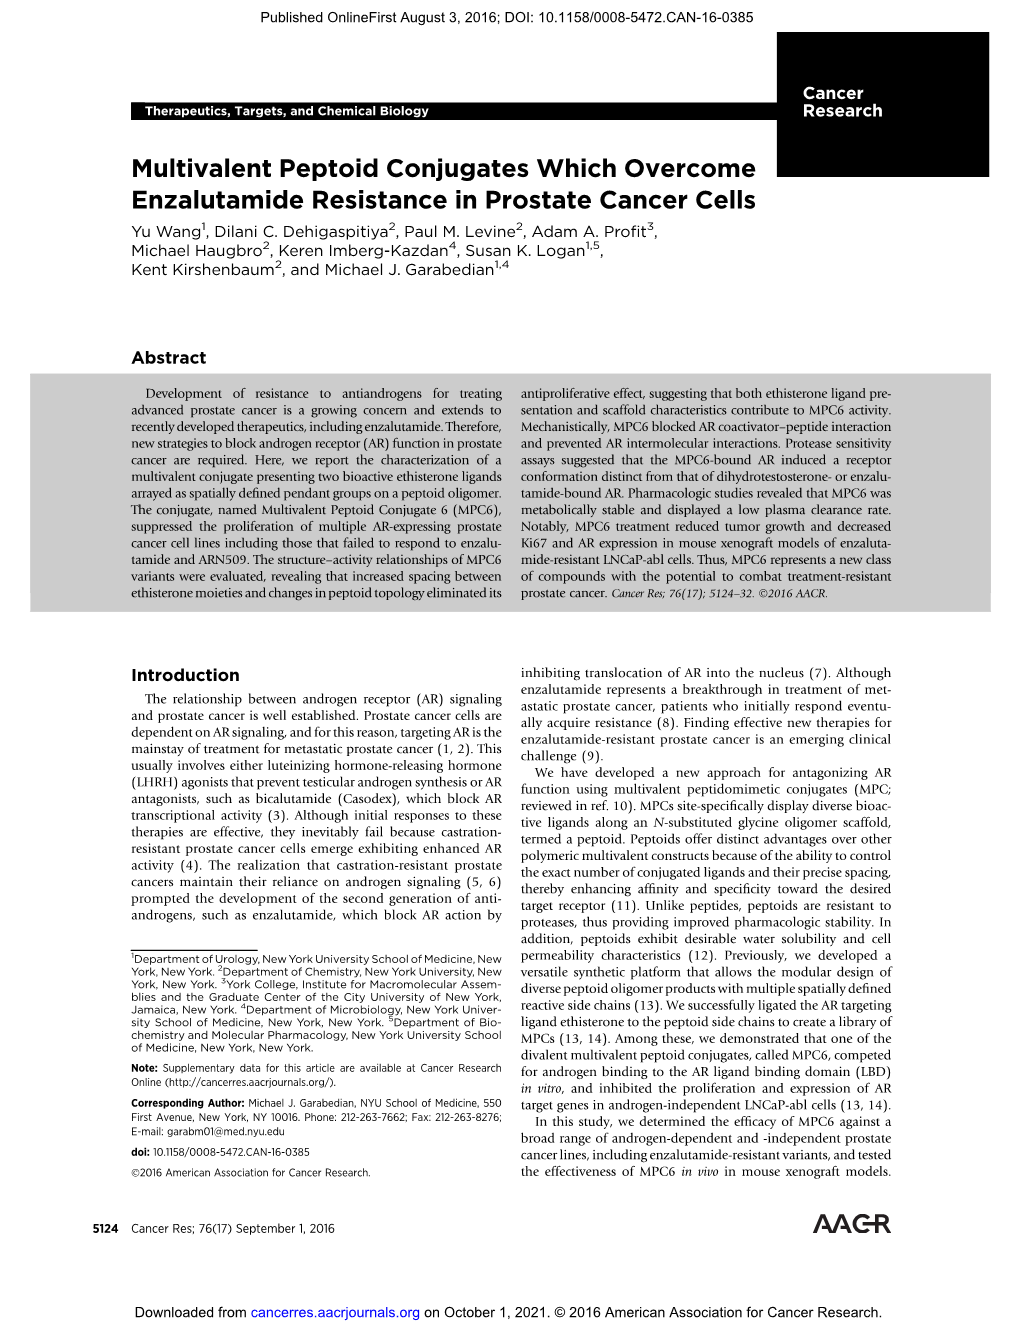 Multivalent Peptoid Conjugates Which Overcome Enzalutamide Resistance in Prostate Cancer Cells Yu Wang1, Dilani C